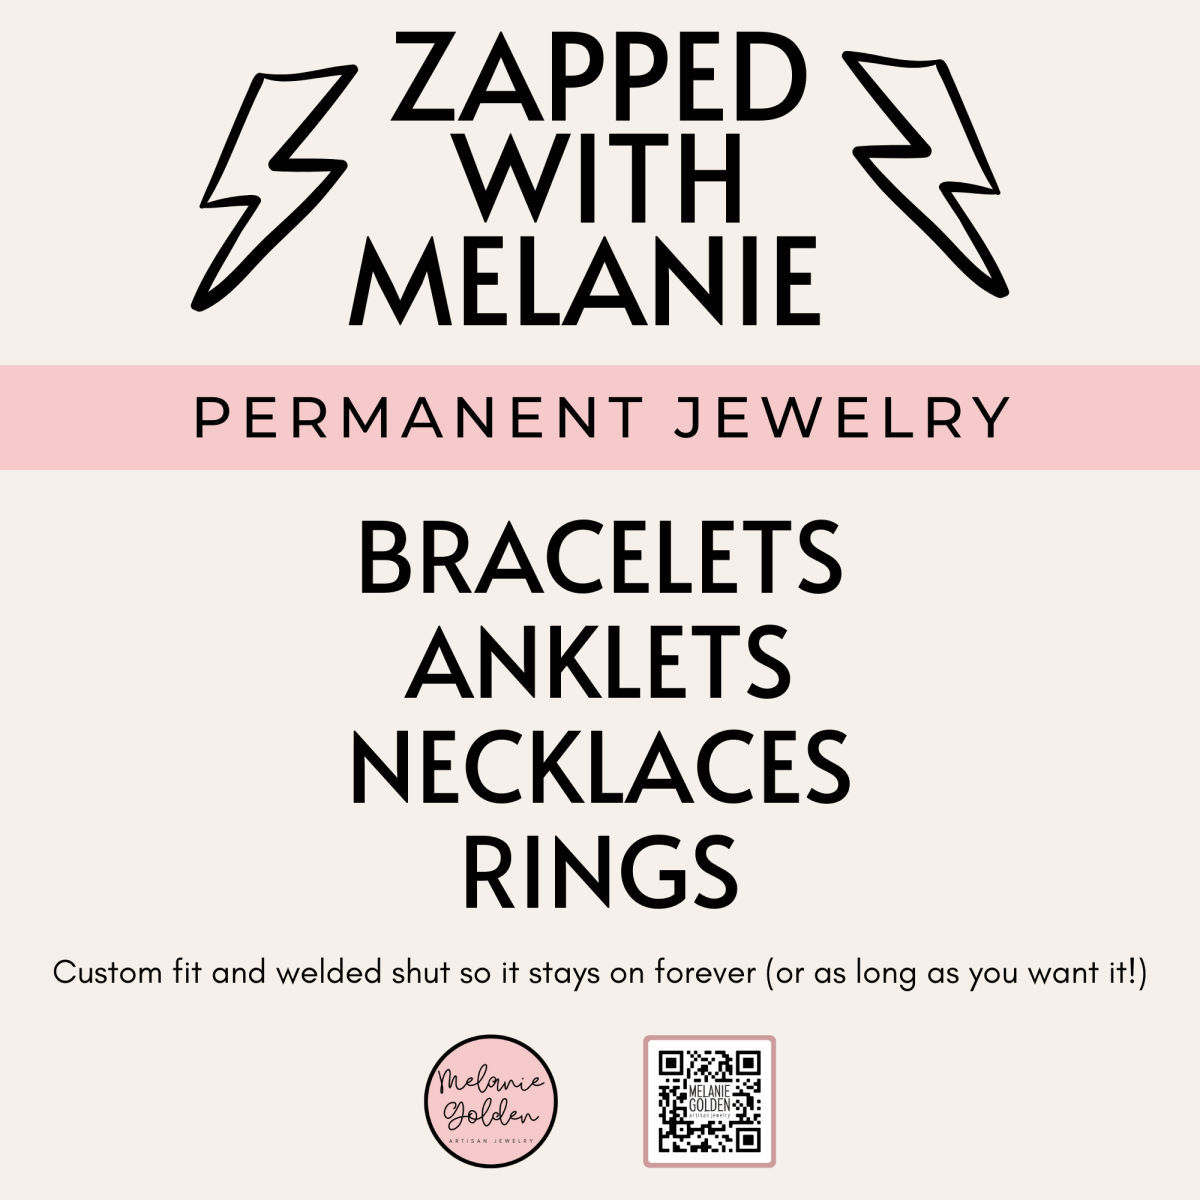 Permanent Jewelry Appointment - Melanie Golden Jewelry - appointments, permanent jewelry